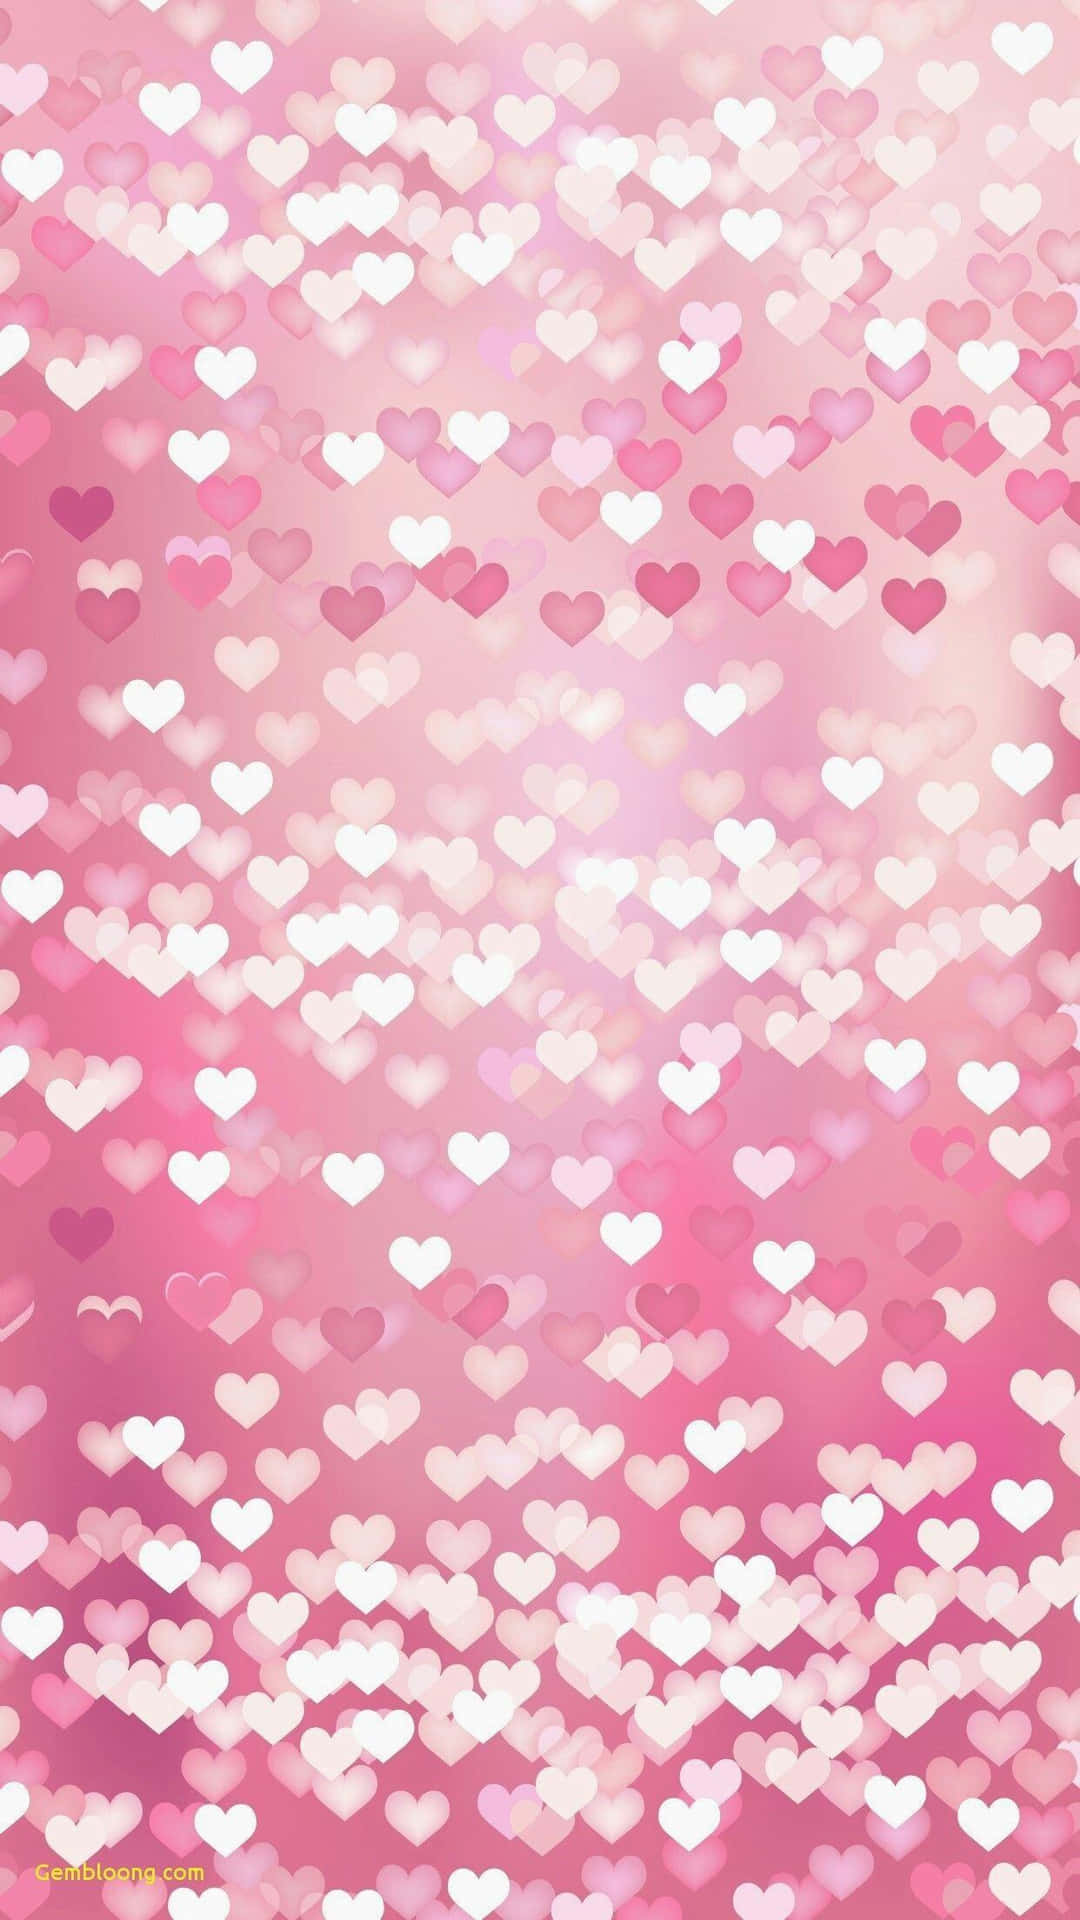 Pink Hearts Background With White Hearts